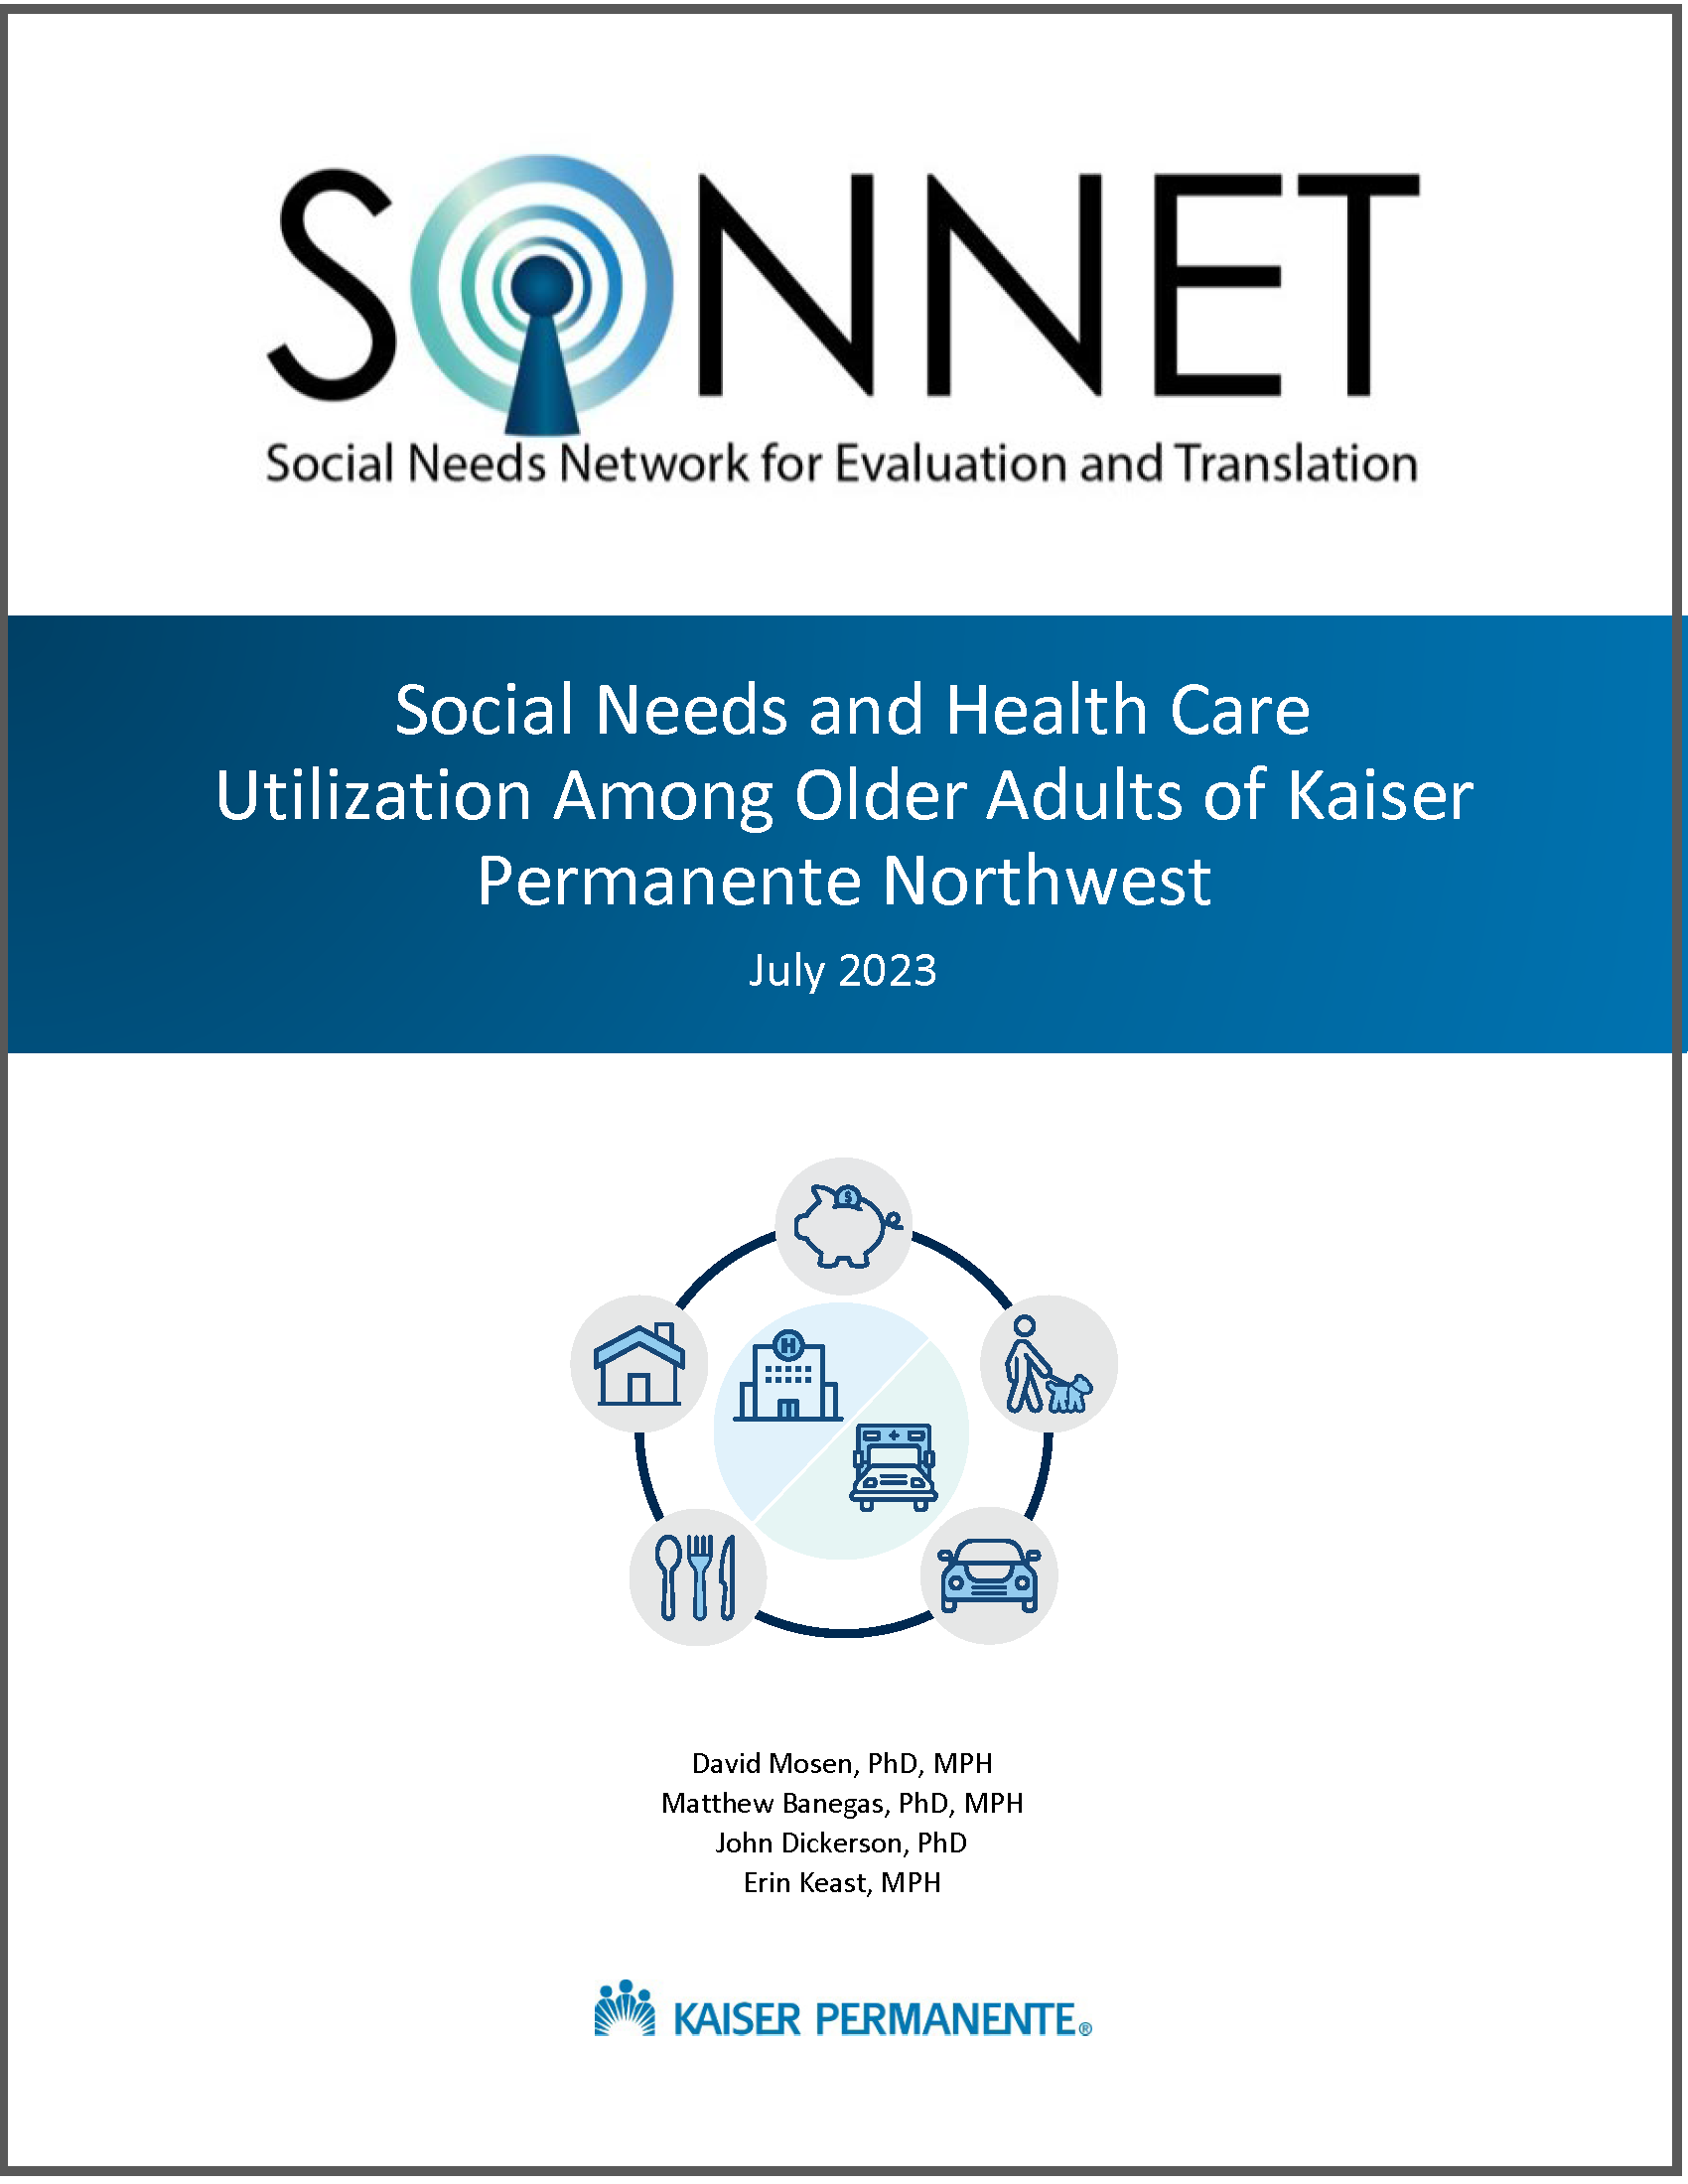 SONNET_Report_Social-Needs-Health-Care-Utilization-Older-Adults-KPNW_FINAL_Page_01.png